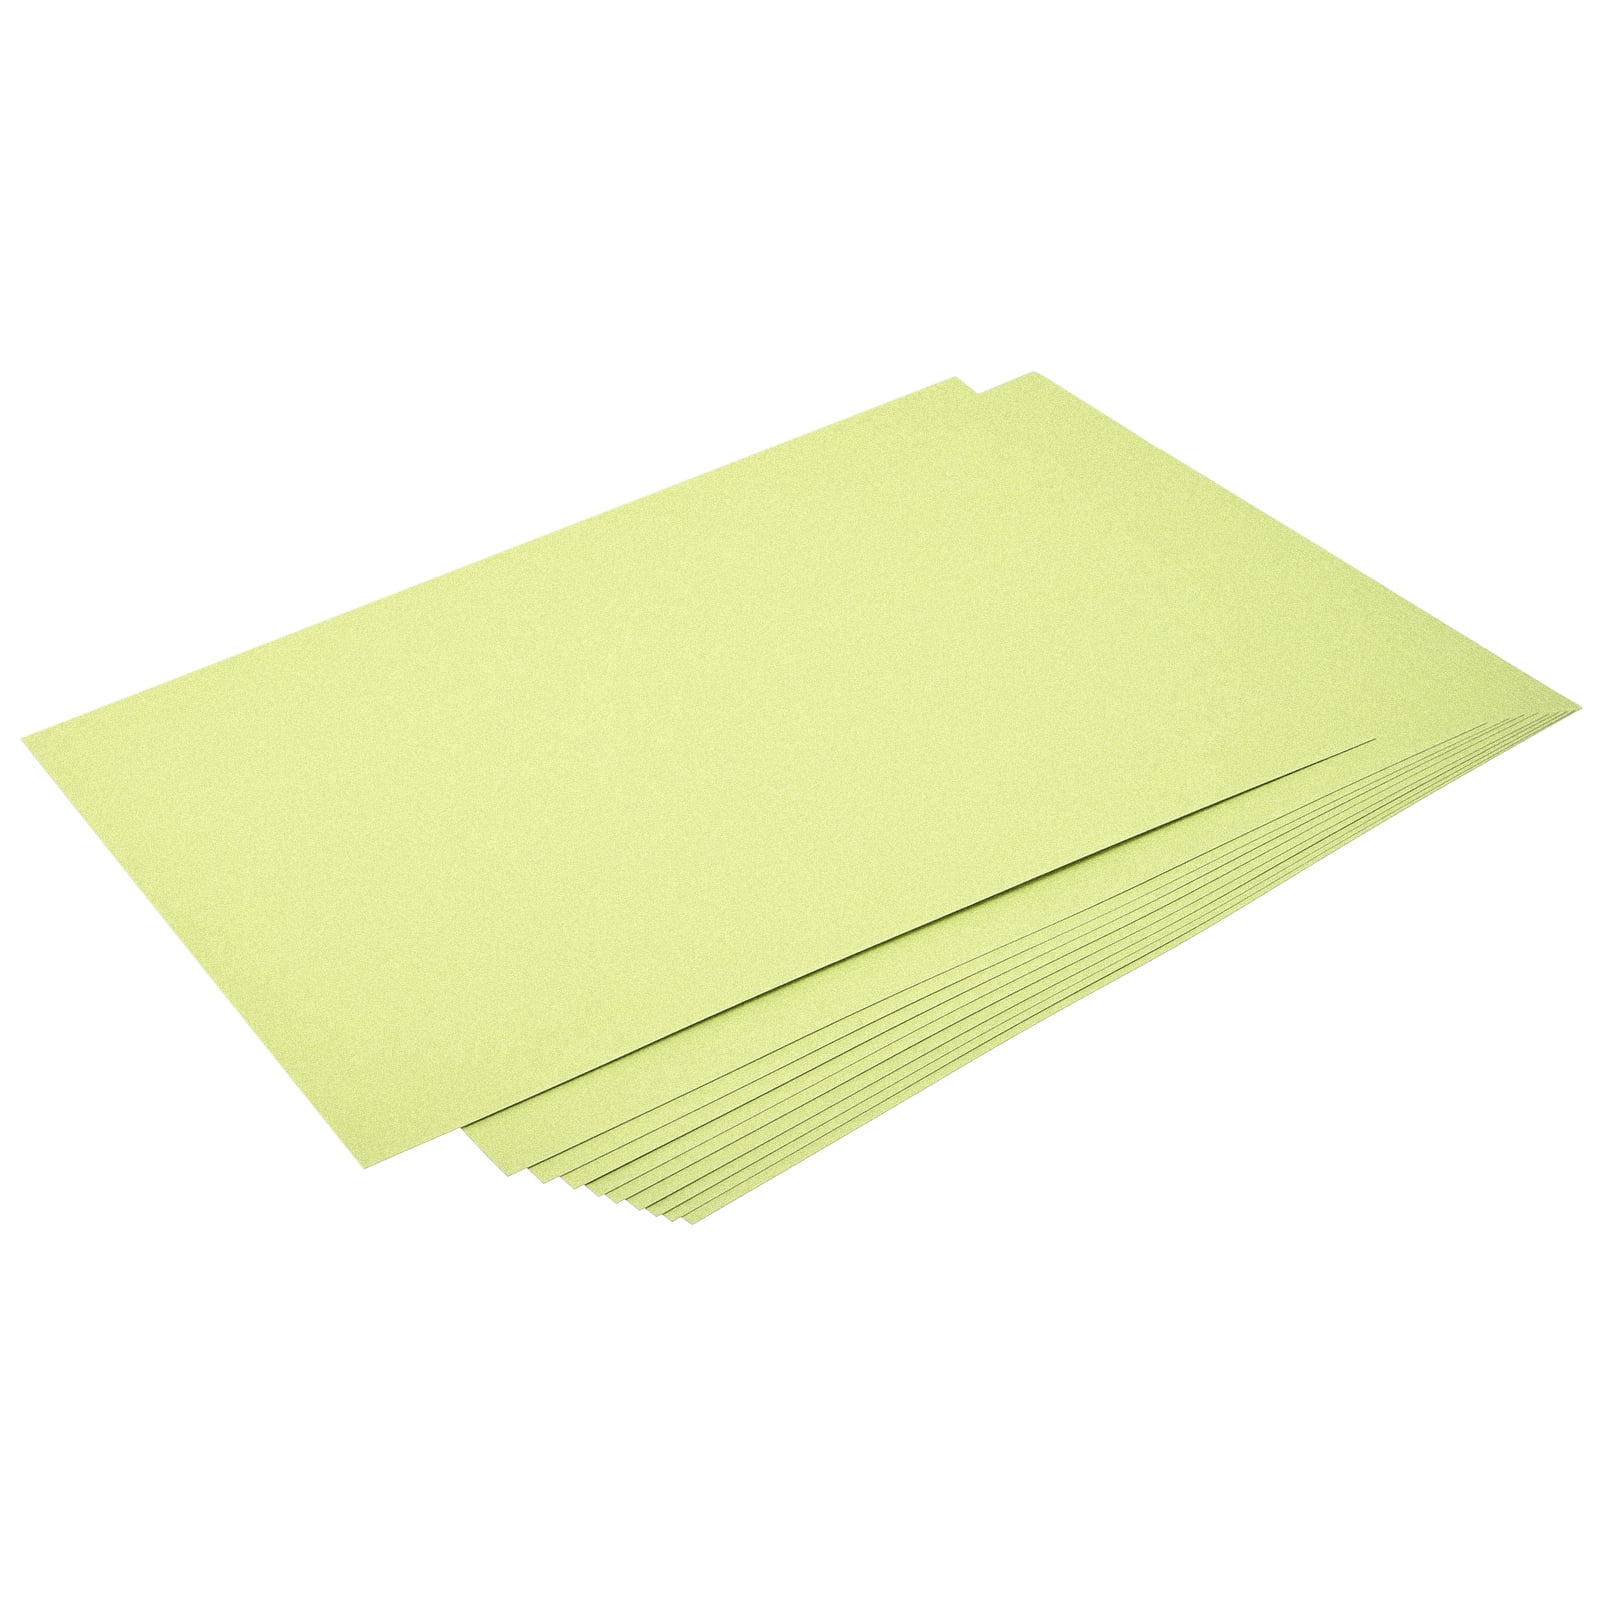 Uxcell Shimmer Cardstock Paper 10 Sheets, 8x11.5 Inch 92 Lb/250gsm